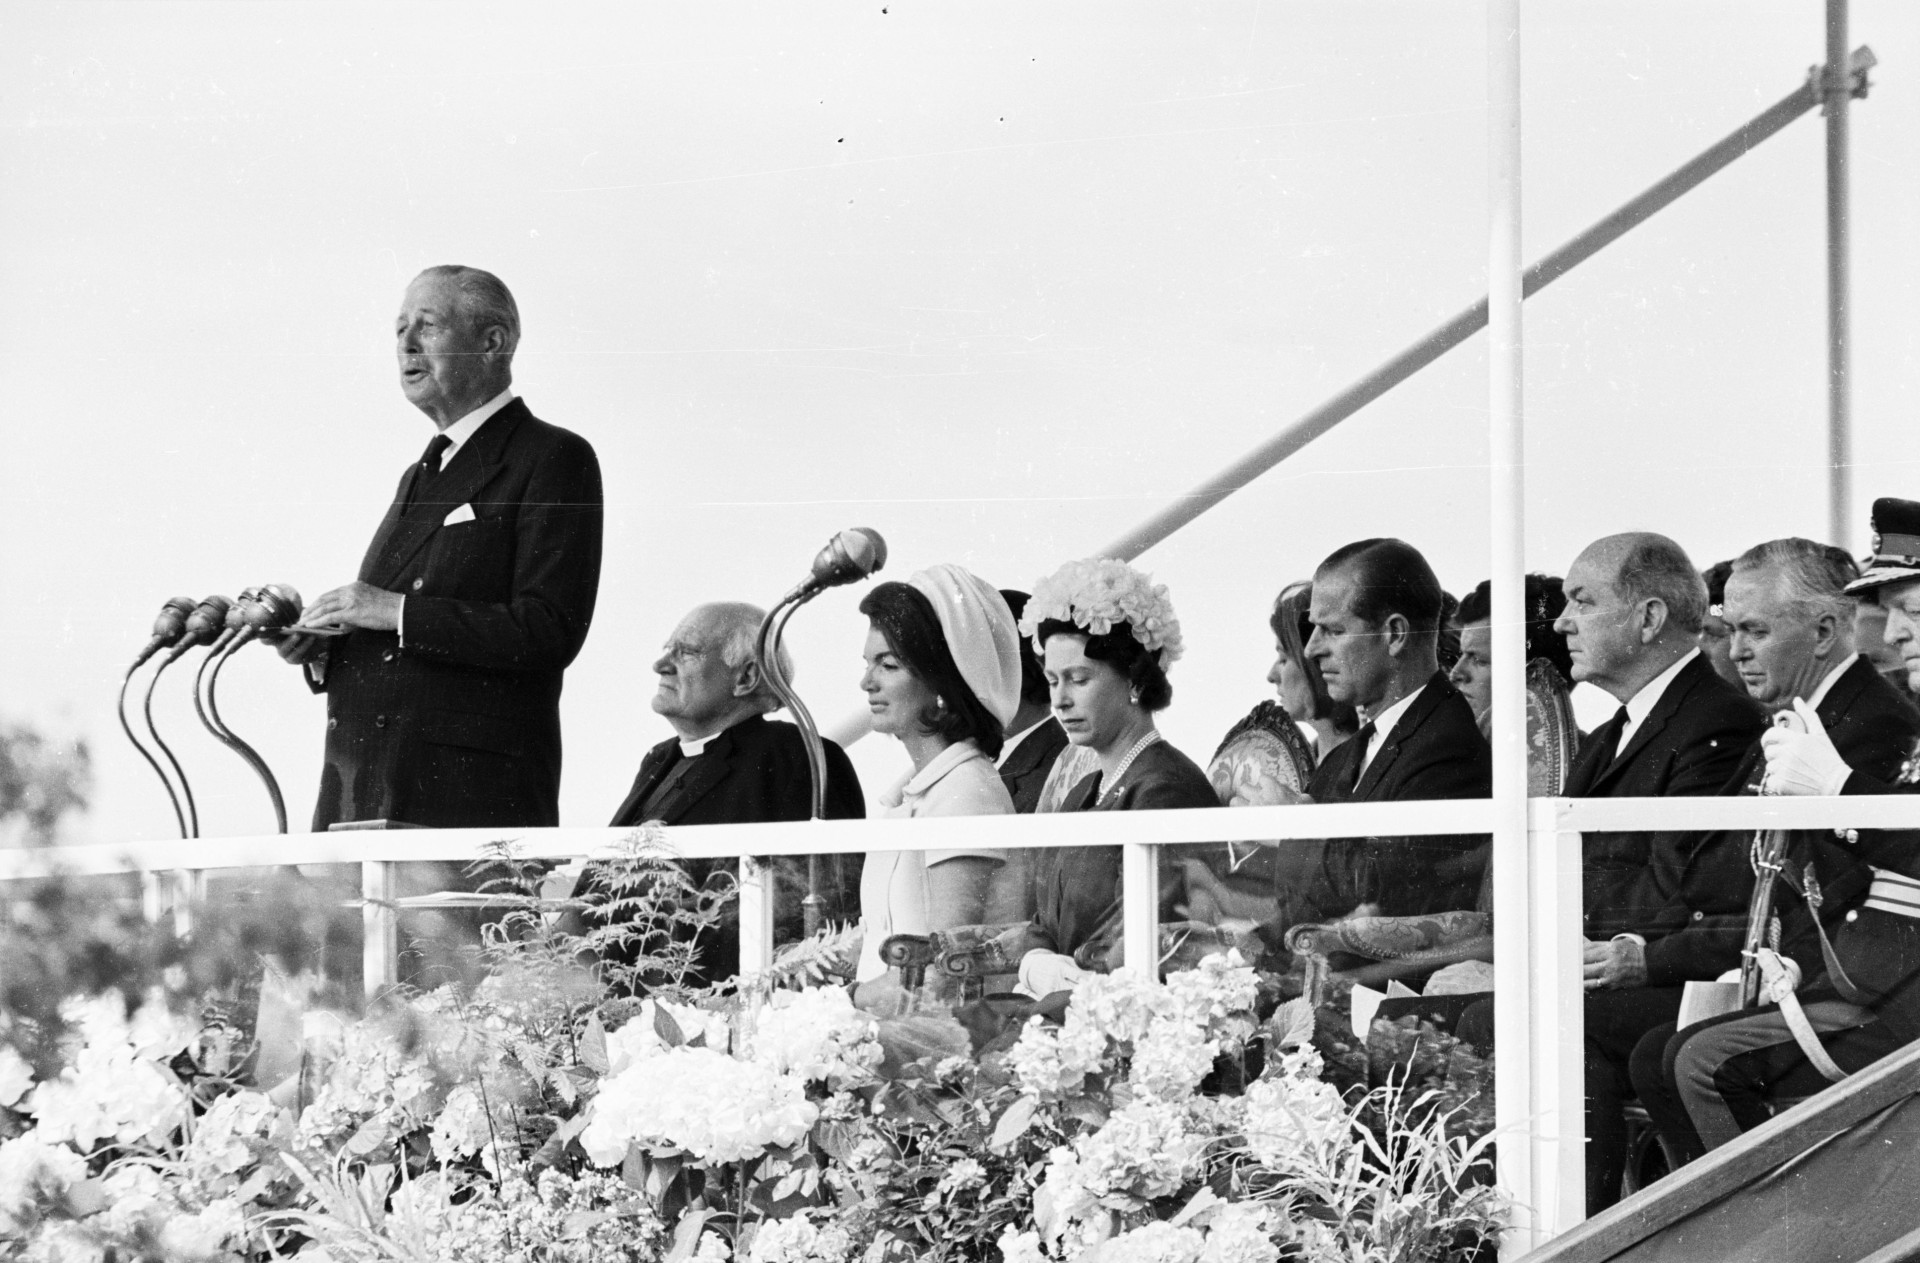 Harold Macmillan gives a speech at the memorial to John F Kennedy. Behind him on the stand are Jackie Kennedy, Queen Elizabeth II, Prince Philip, and British Prime Minister Harold Wilson.<p><a href="https://www.msn.com/en-za/community/channel/vid-7xx8mnucu55yw63we9va2gwr7uihbxwc68fxqp25x6tg4ftibpra?cvid=94631541bc0f4f89bfd59158d696ad7e">Follow us and access great exclusive content every day</a></p>